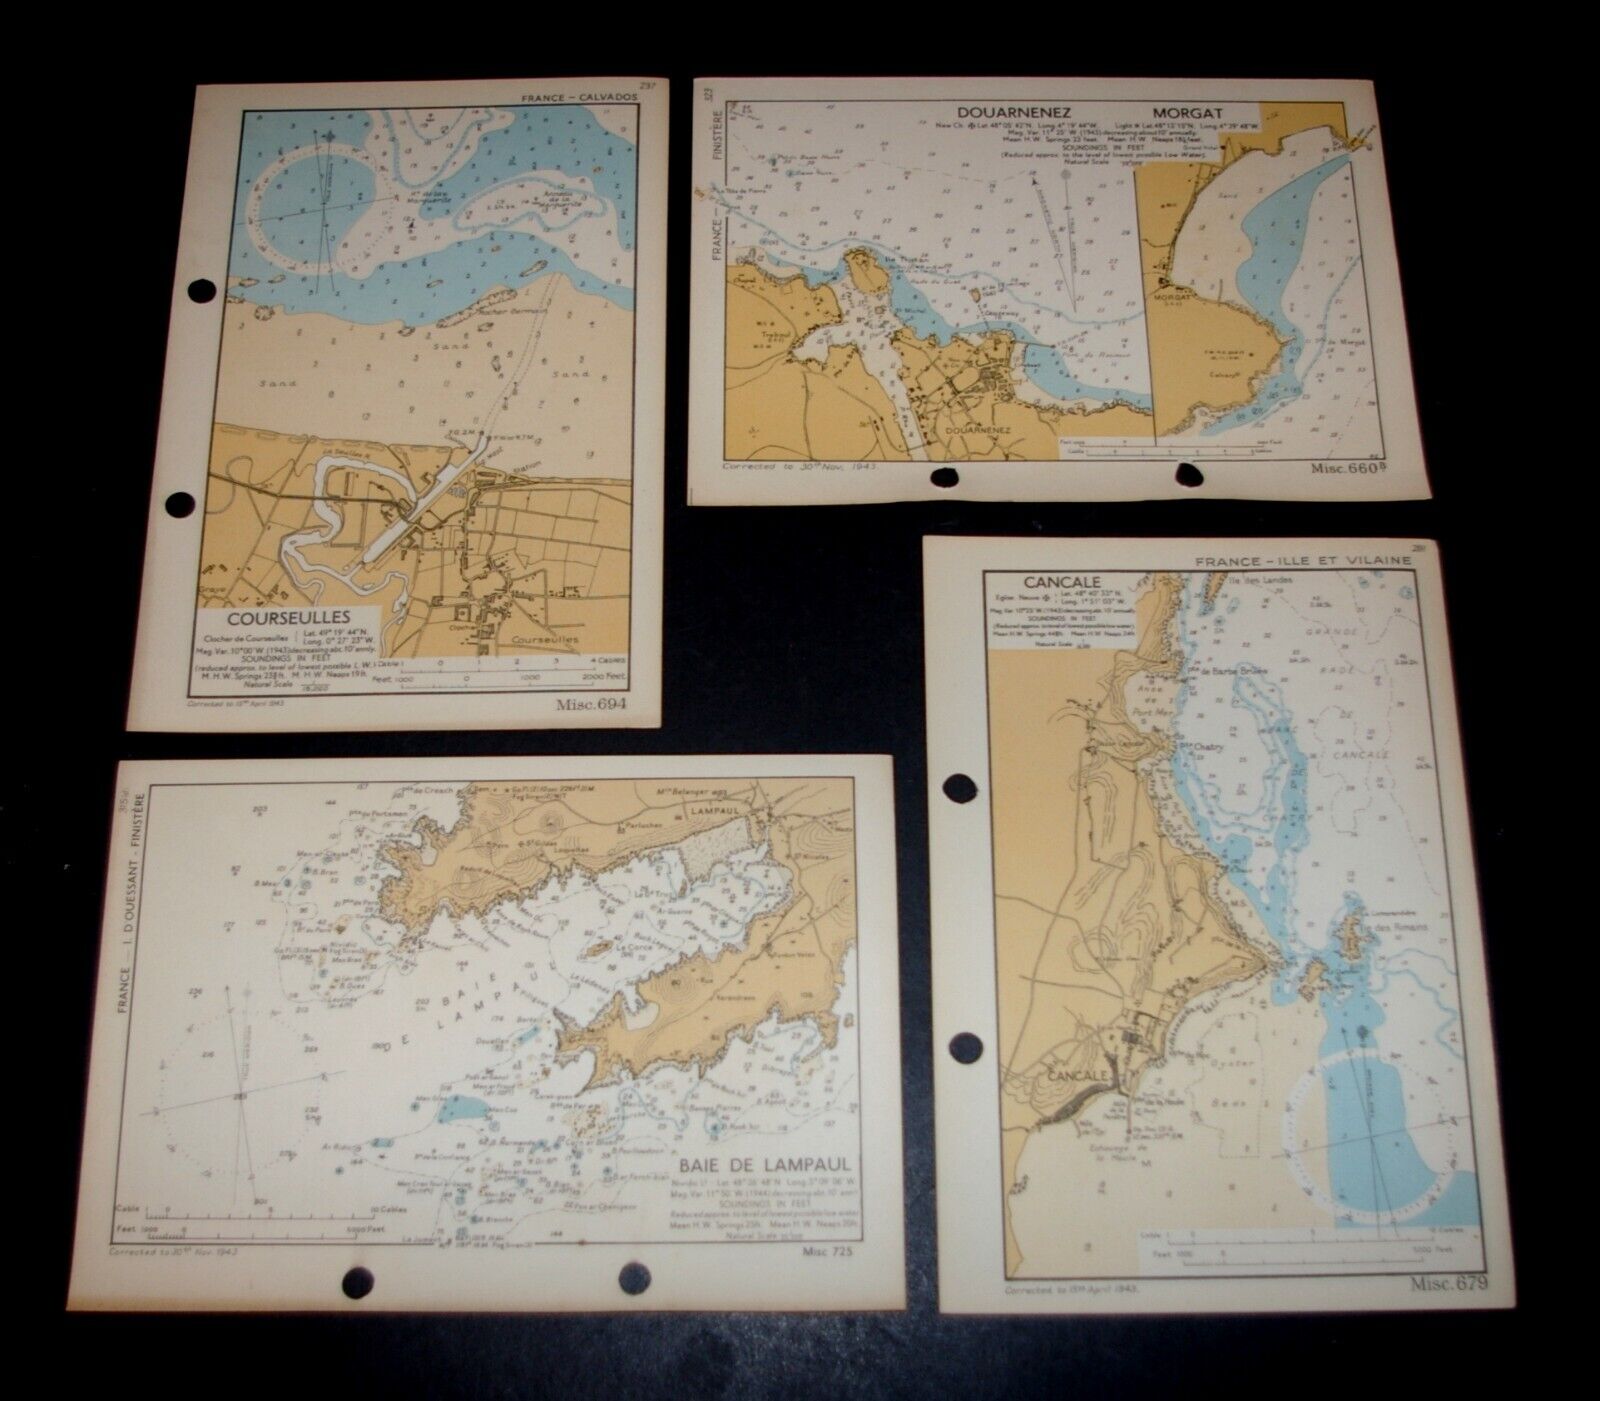 WW2 OVERLORD 4 Planning maps for D-day invasion of FRANCE - 1943 COURSEULLES